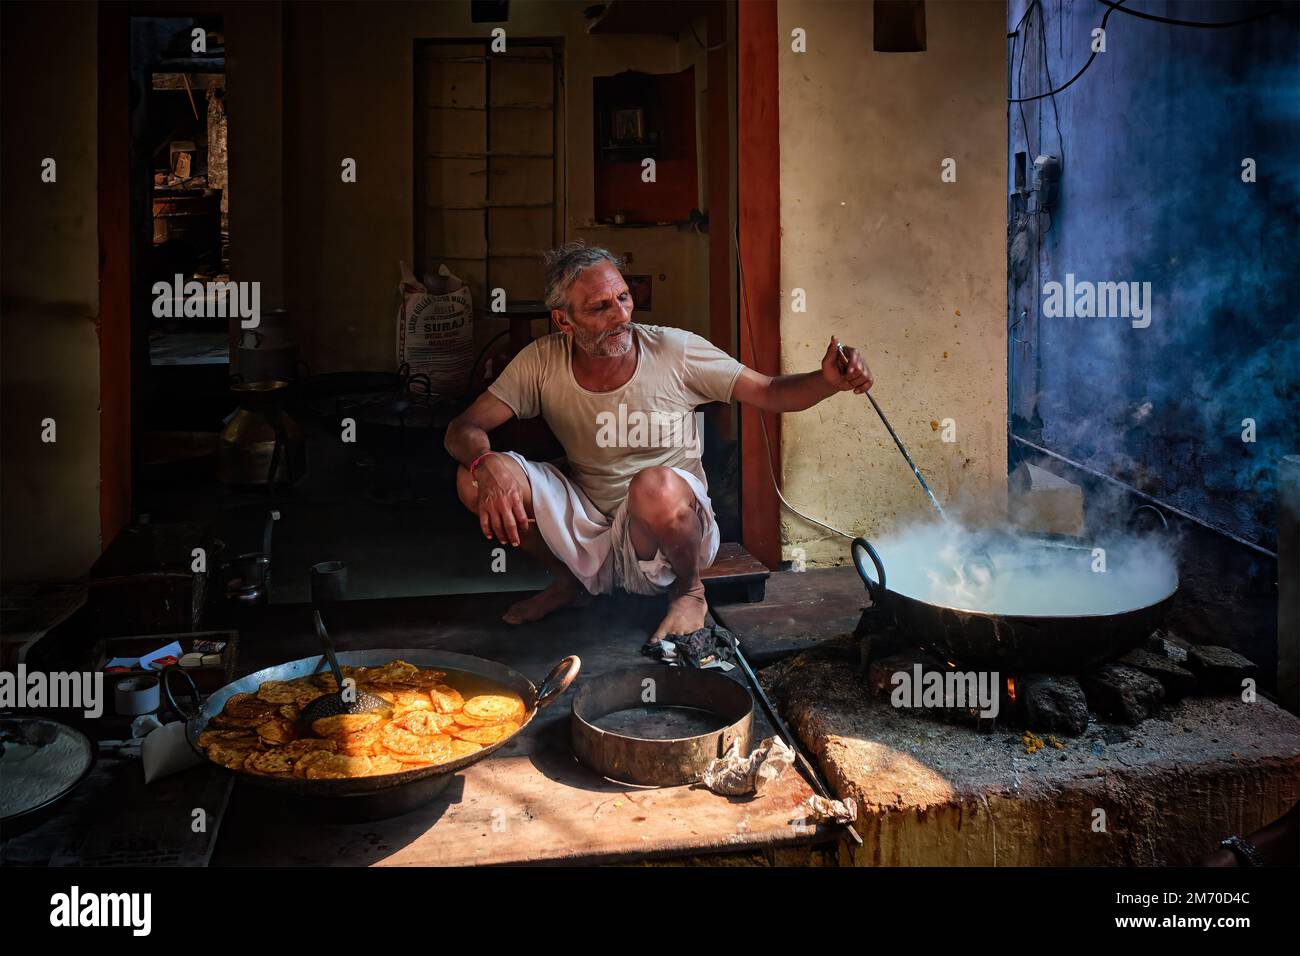 Pushkar, India - November 7, 2019: Street food stall cook cooking mixing with spoon sweet puri bread and rabri sweet, condensed-milk-based dish in str Stock Photo